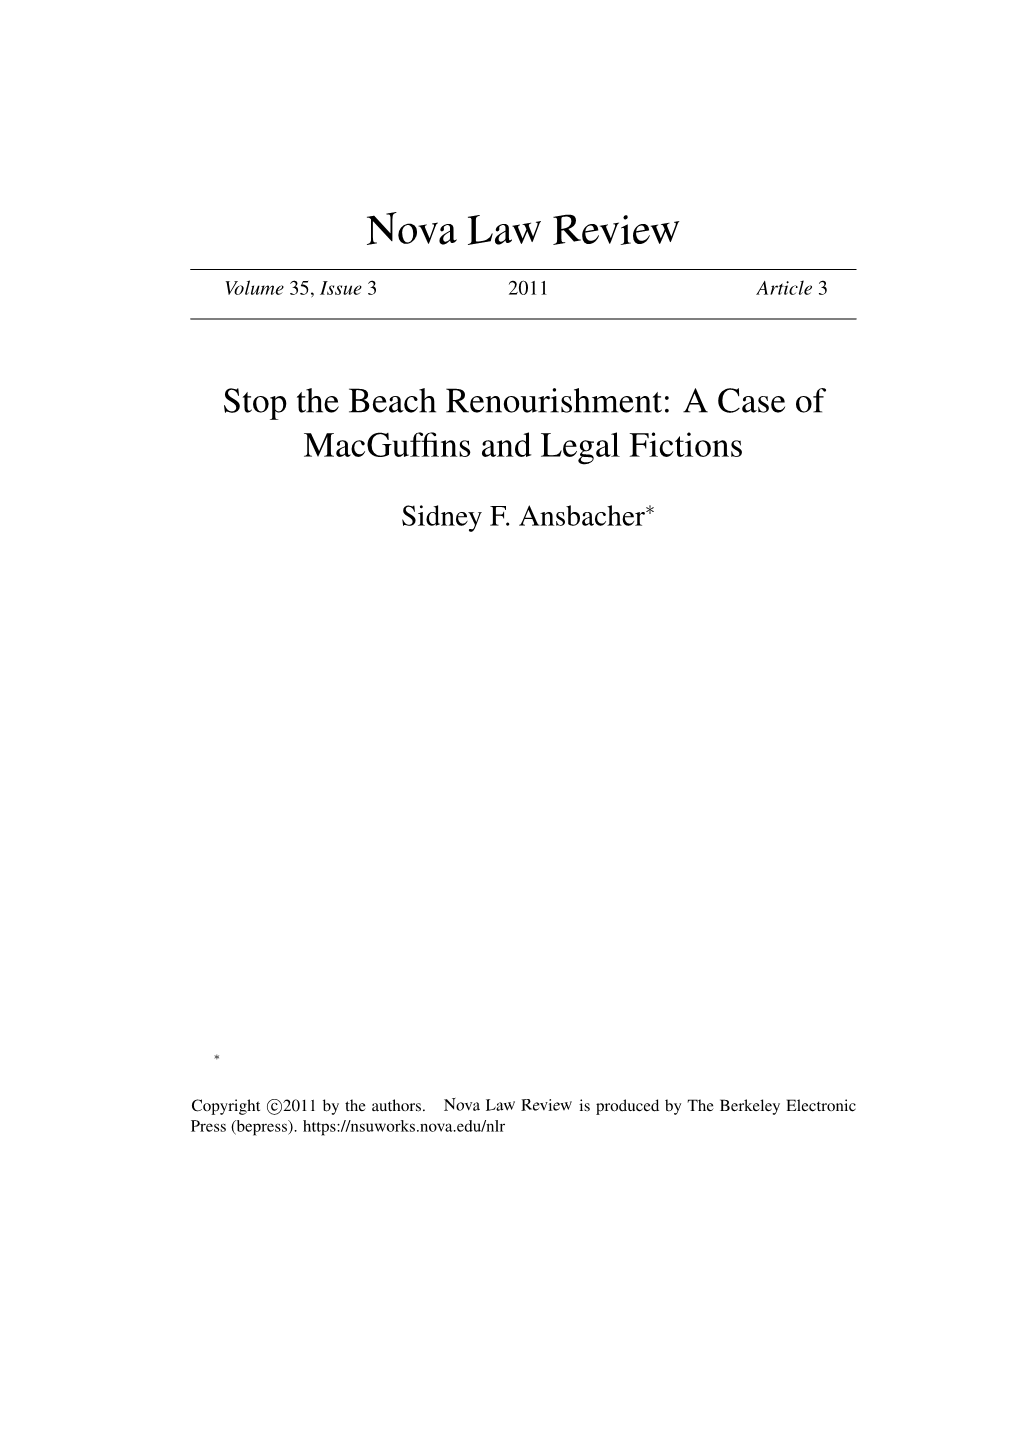 Stop the Beach Renourishment: a Case of Macgufﬁns and Legal Fictions